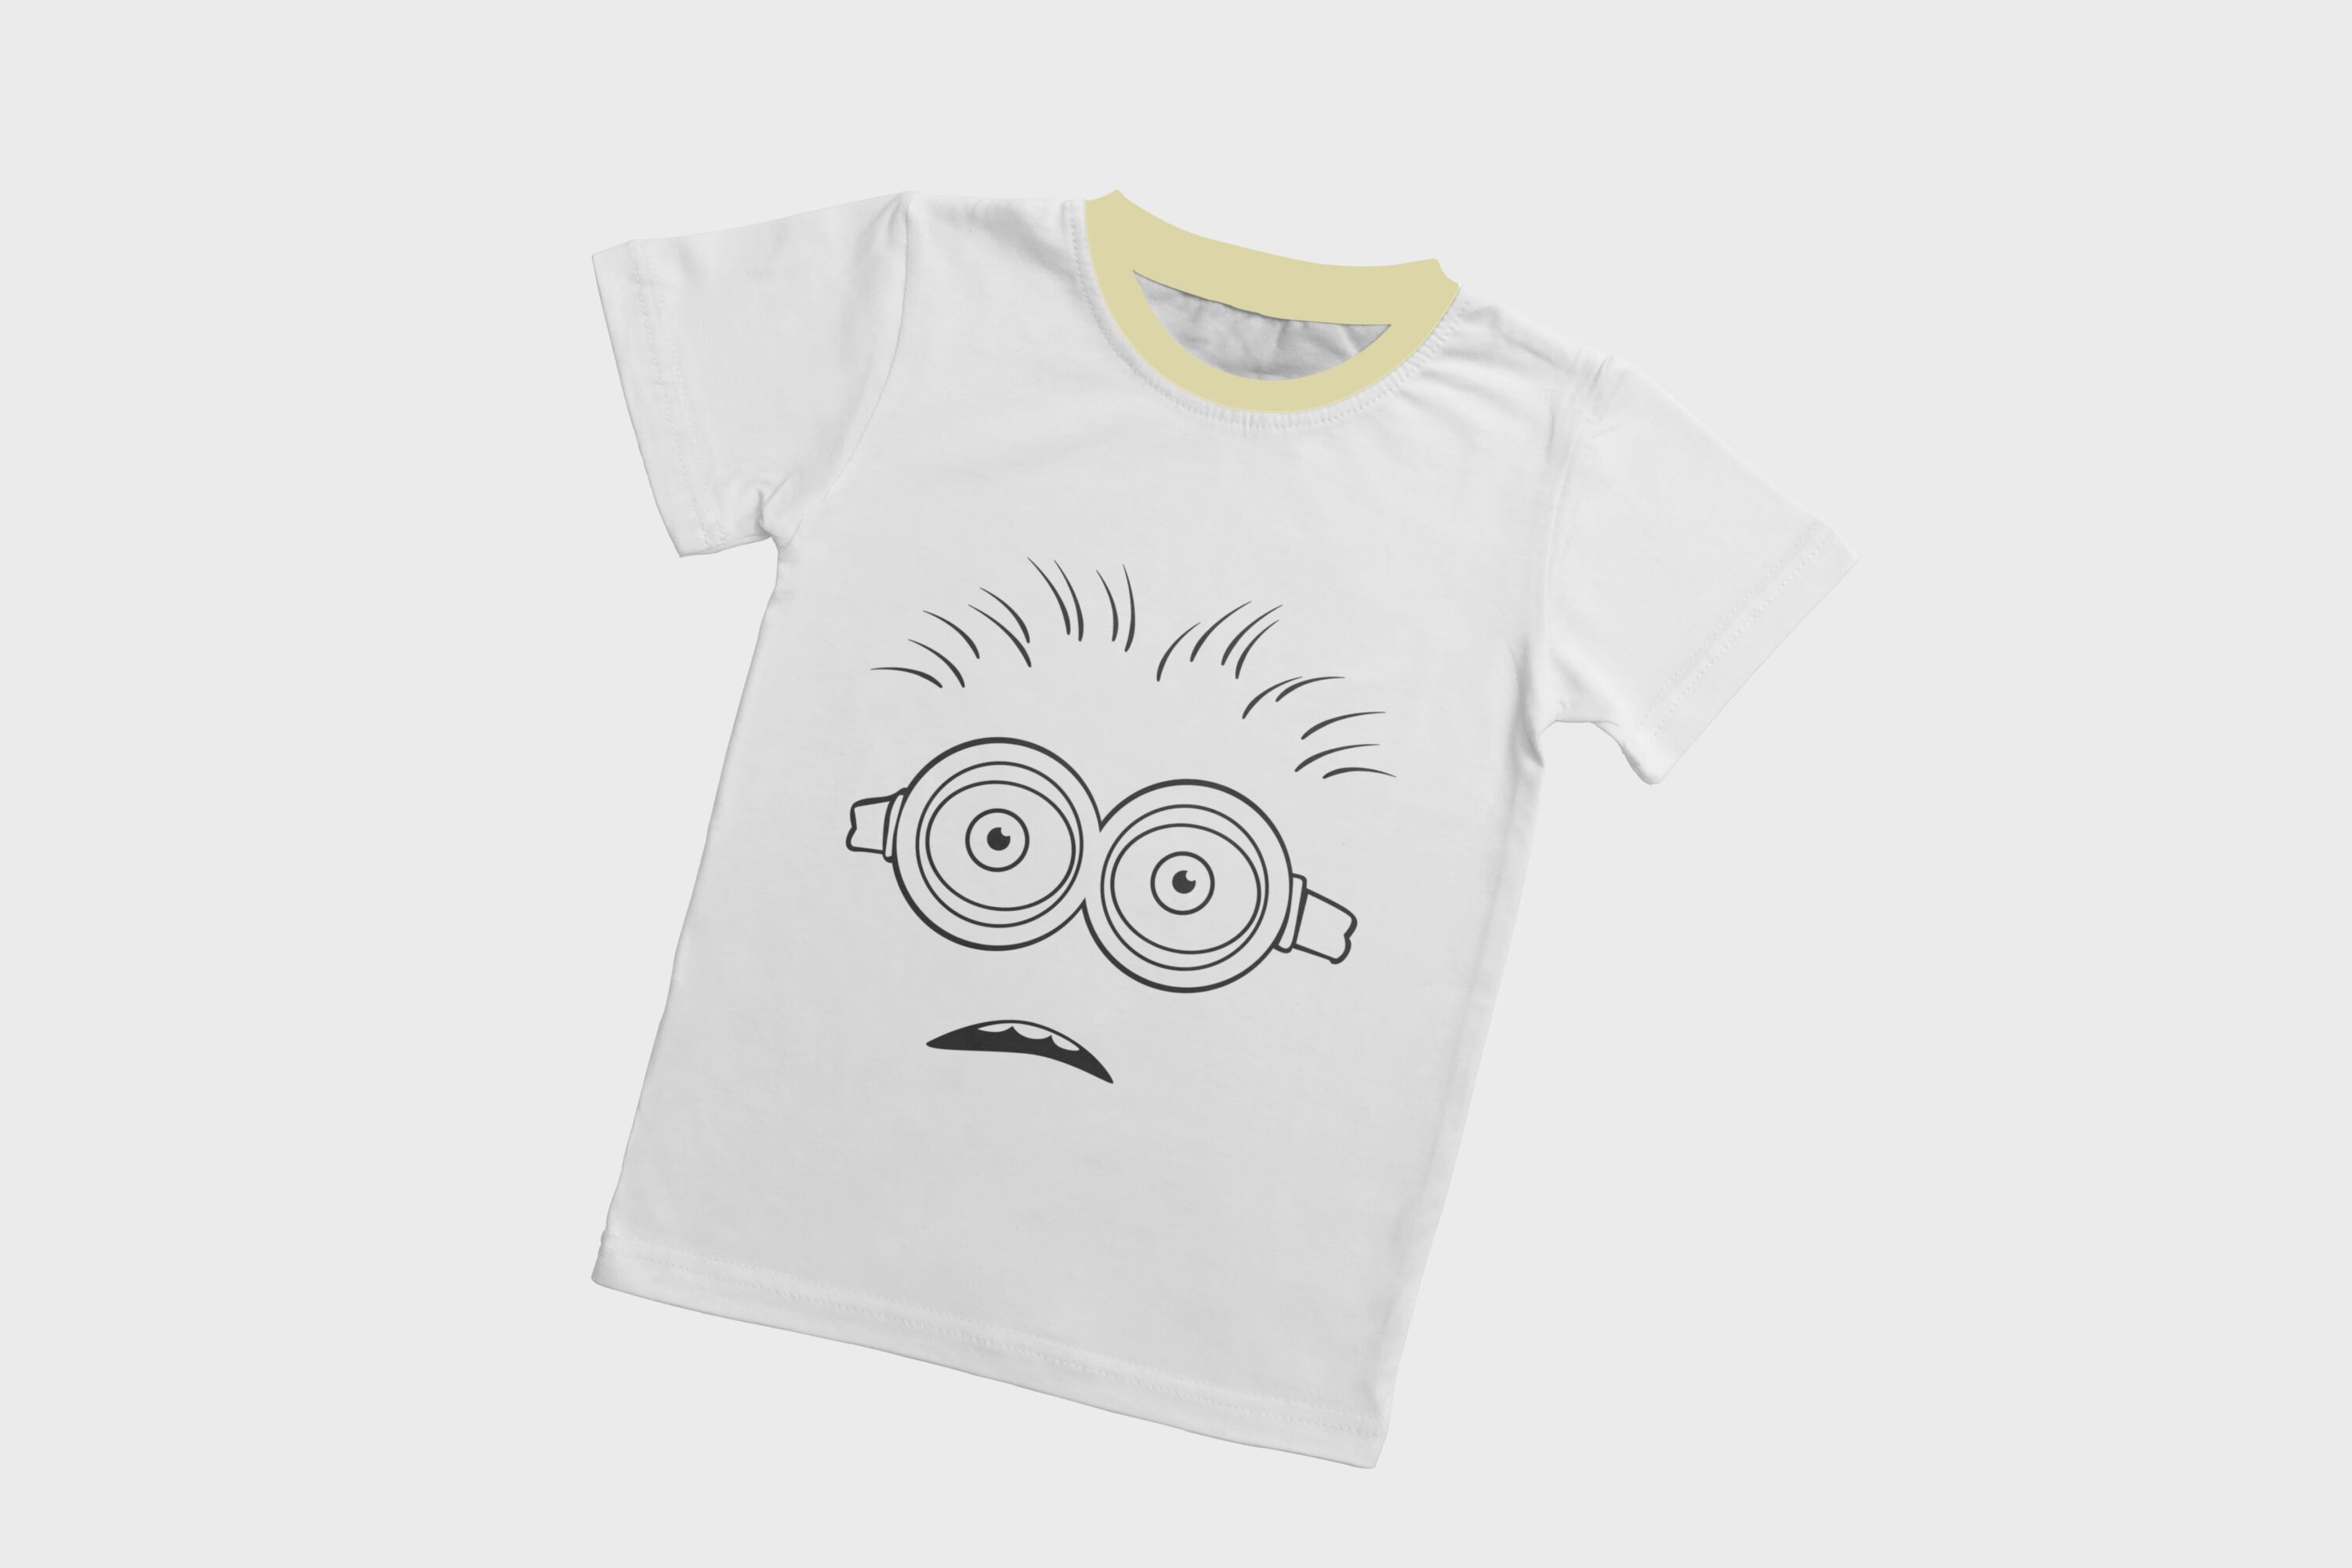 A white T-shirt with a dirty yellow collar and a silhouette face of a puzzled minion.